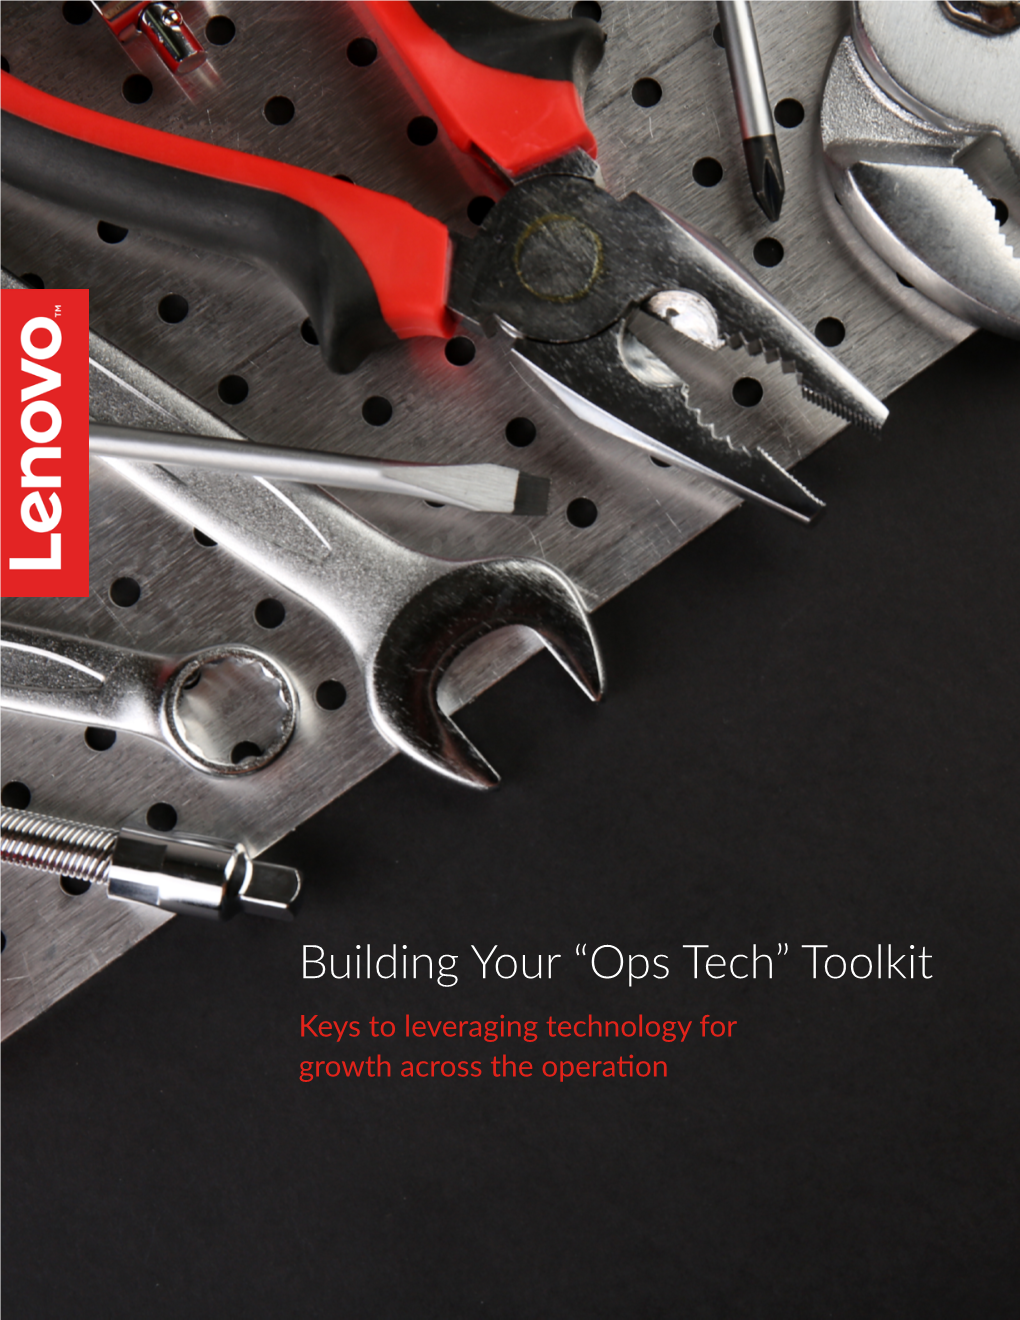 Toolkit Keys to Leveraging Technology for Growth Across the Operation Introduction: Technology Delivers Performance